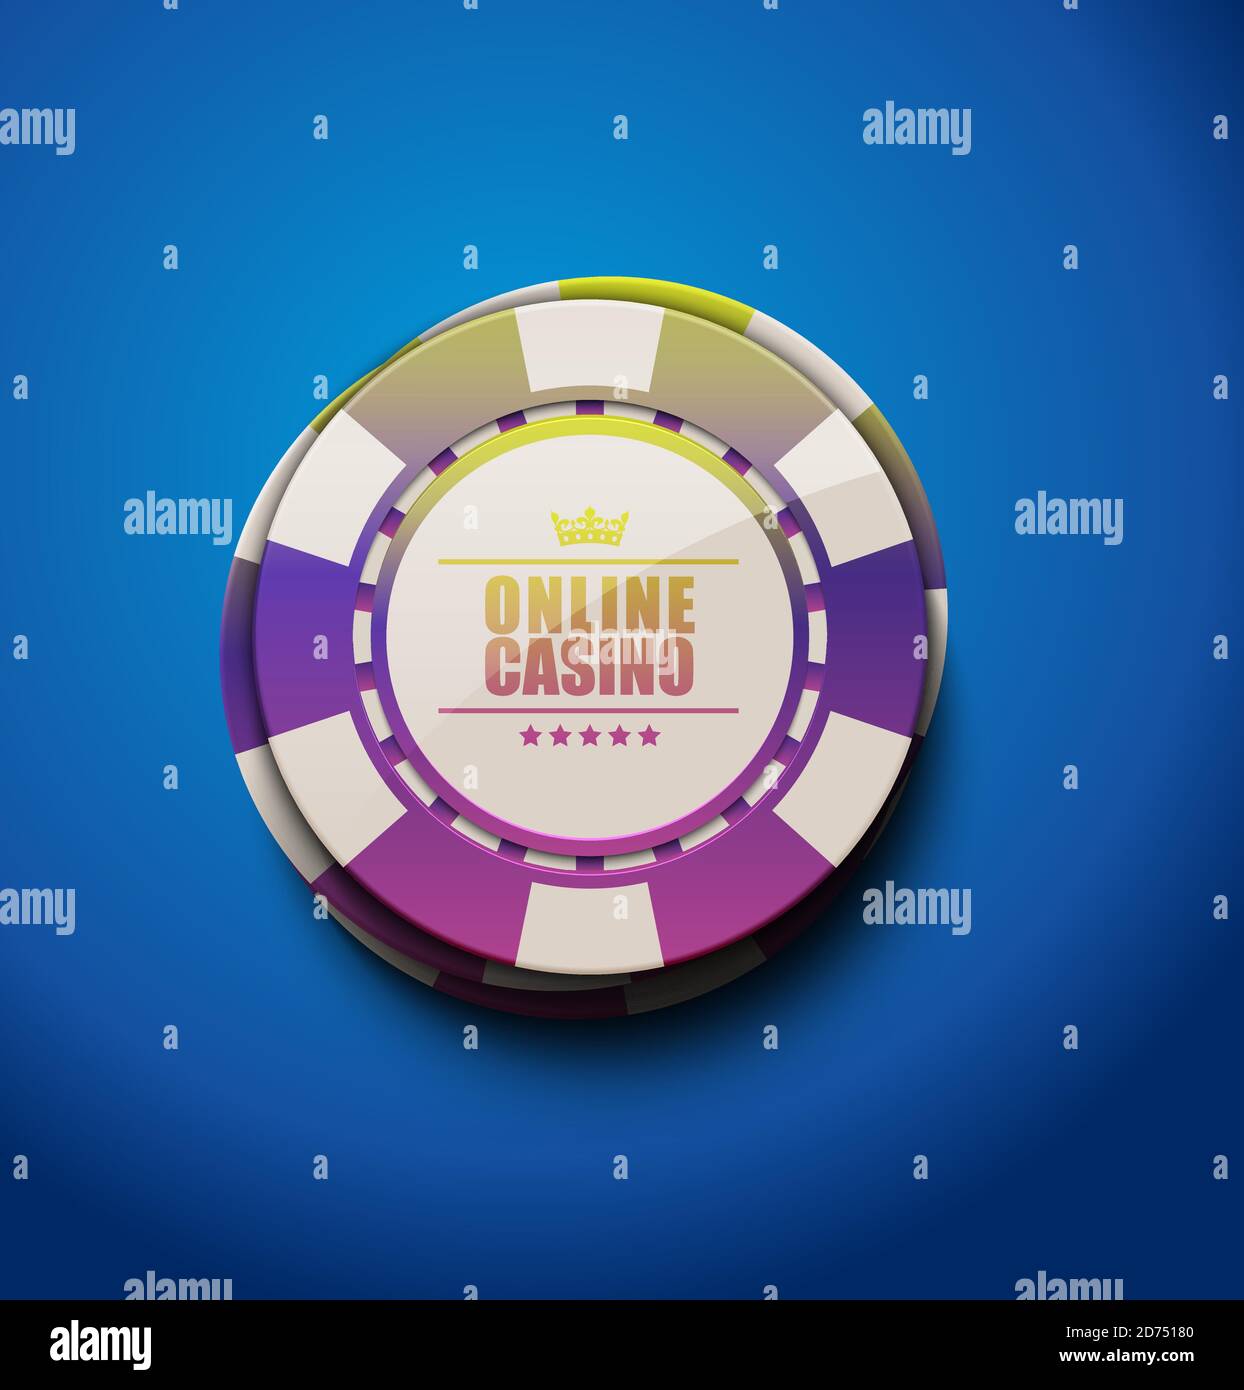 Vector rainbow color glossy casino poker chips, top view. Blue background. Online casino, blackjack poster. Stock Vector